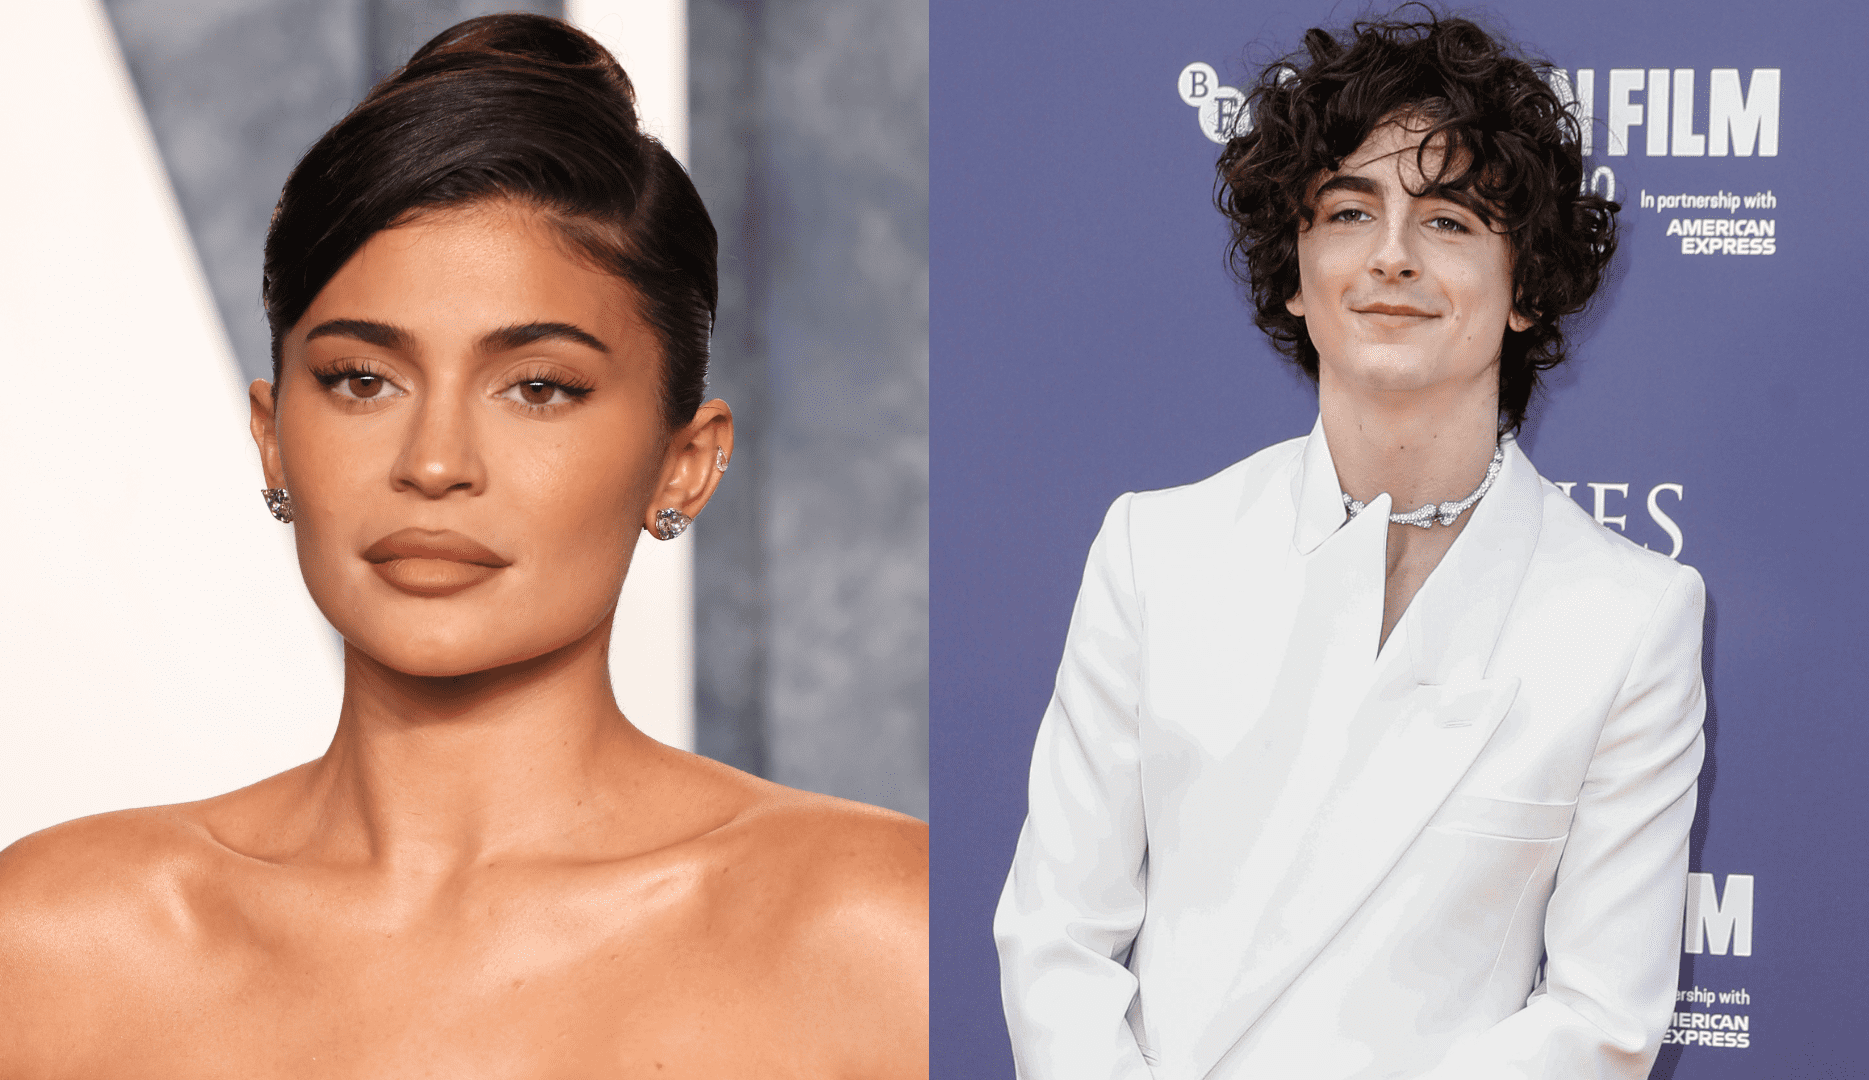 Magazine claims that Kylie Jenner and Timothée Chalamet are just